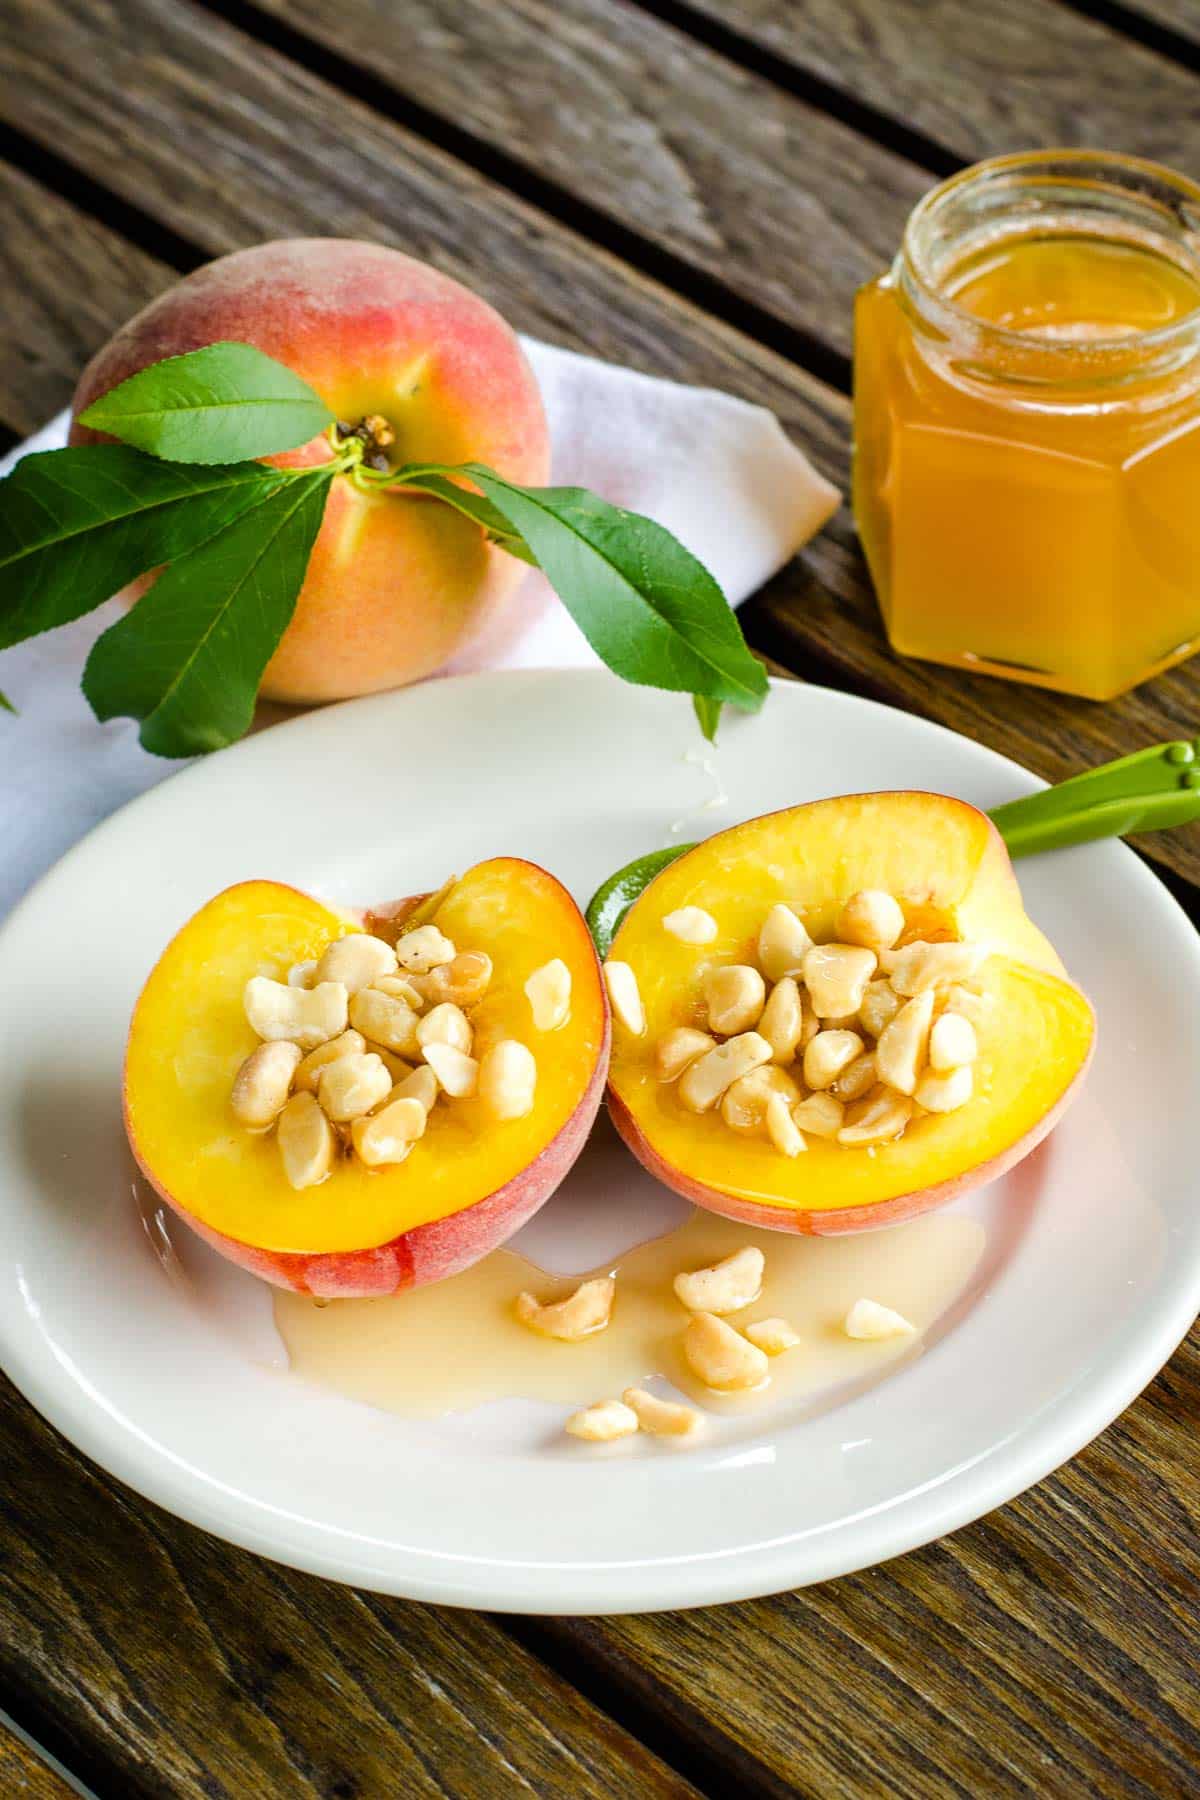 Peach halves with macadamia nuts and honey on white plate with whole peach and honey jar.